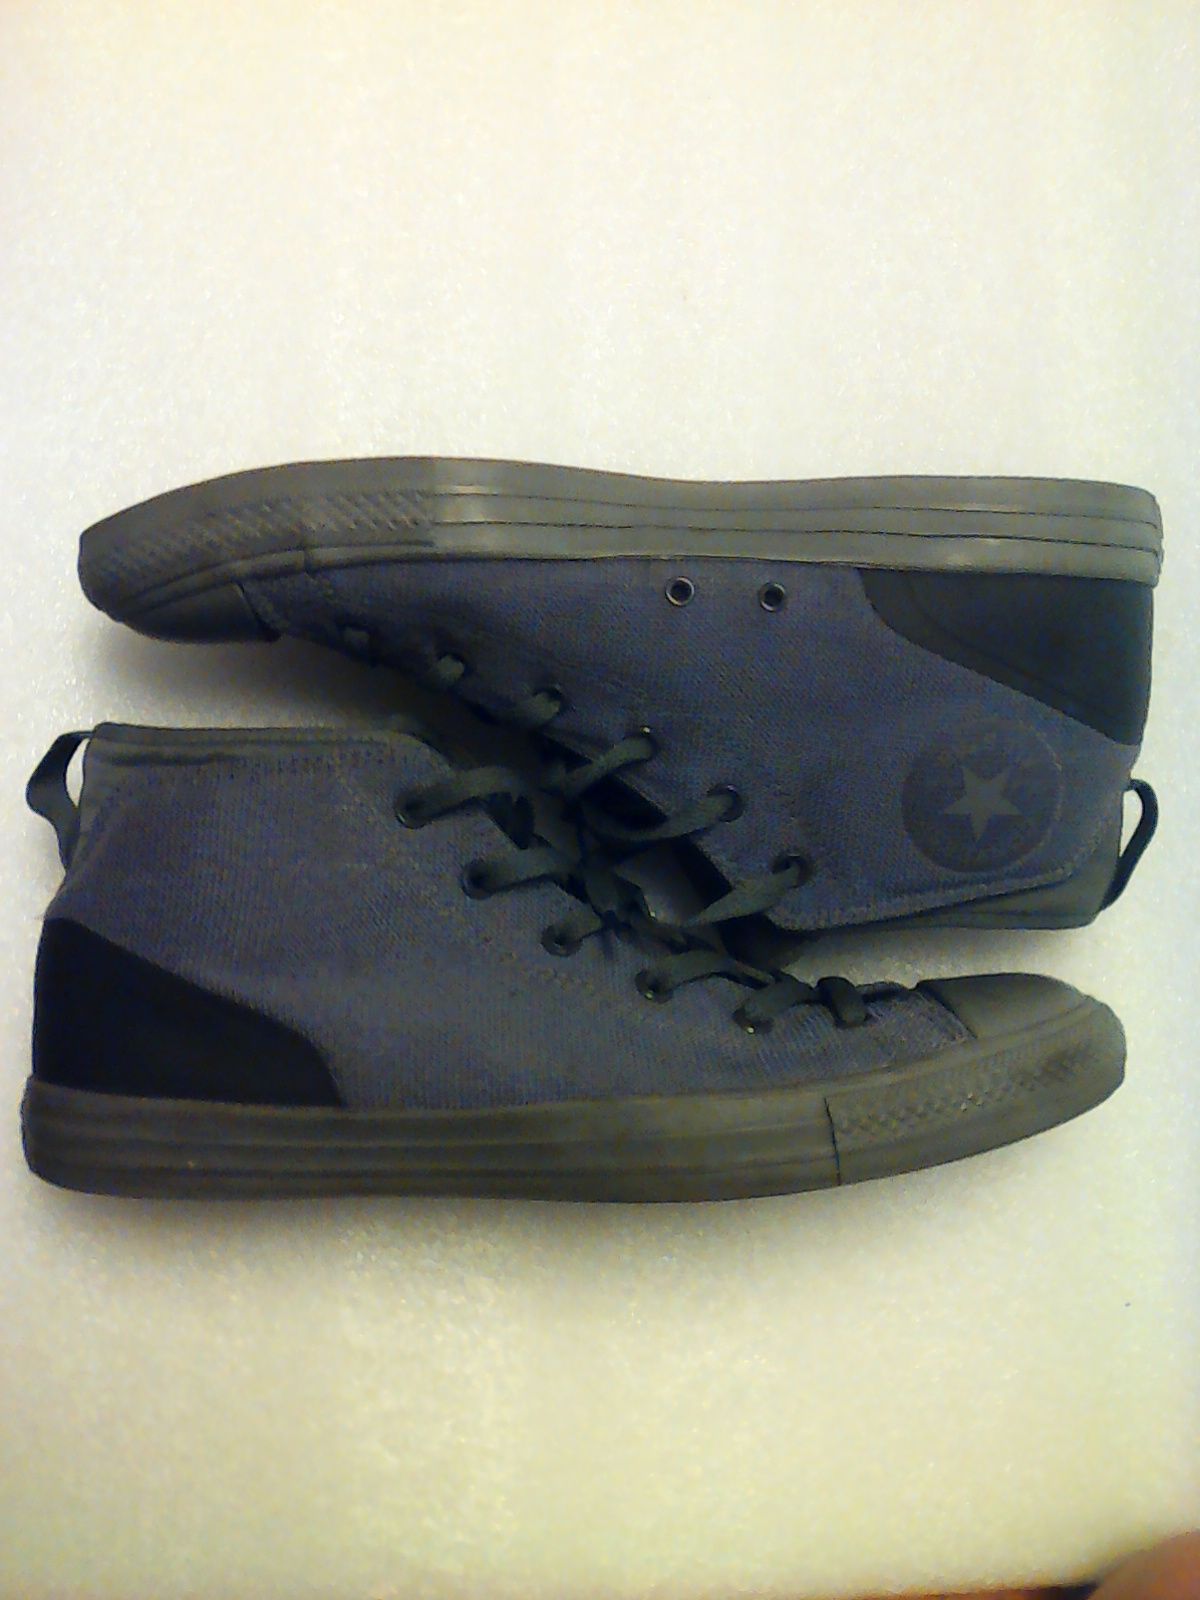 Converse All Star Chuck Taylor Shoes Gray men's size 12 women's size 14 nice Gray and black